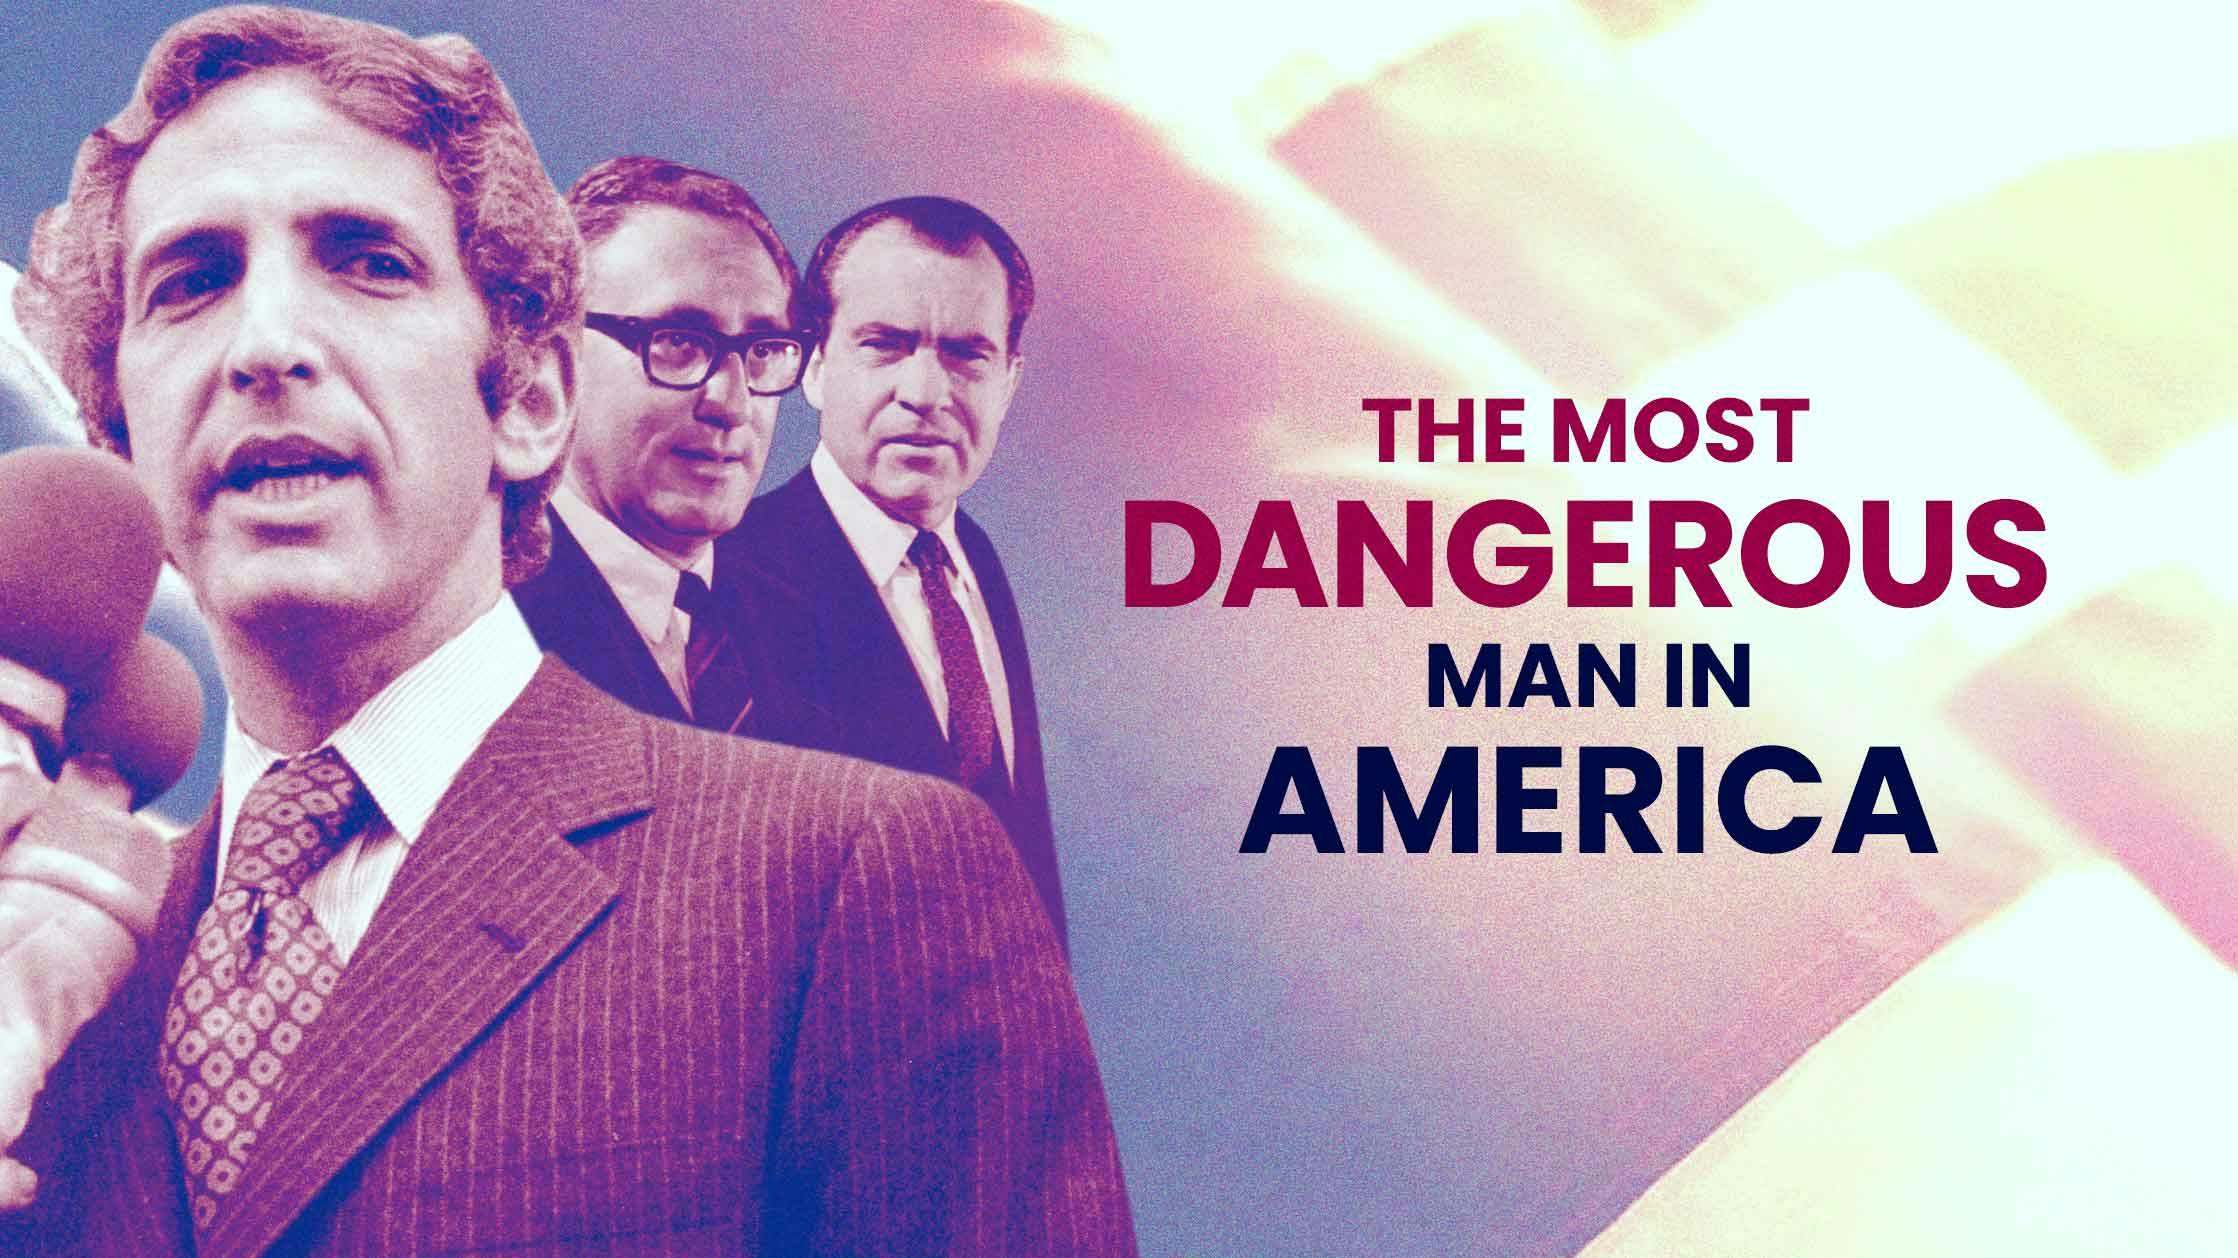 The Most Dangerous Man in America